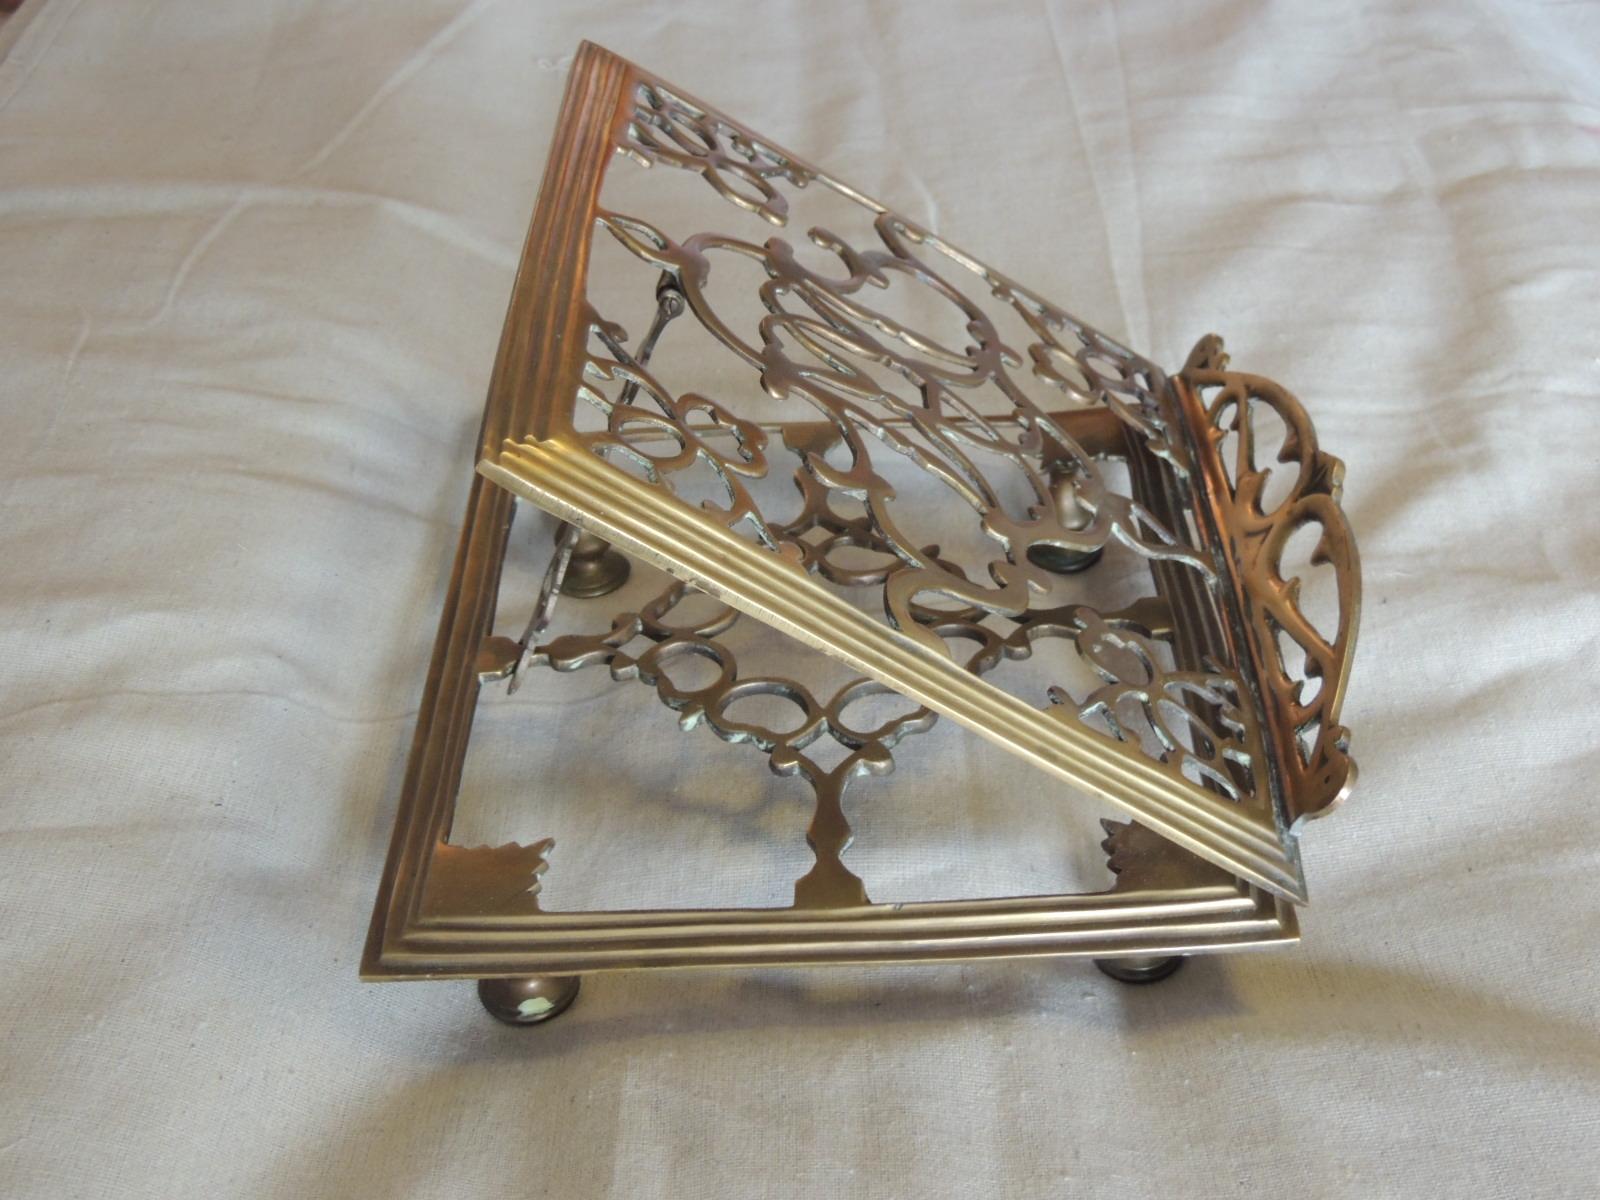 Late 20th Century Vintage Brass Ornate Book or Bible Stand with Small Round Feet